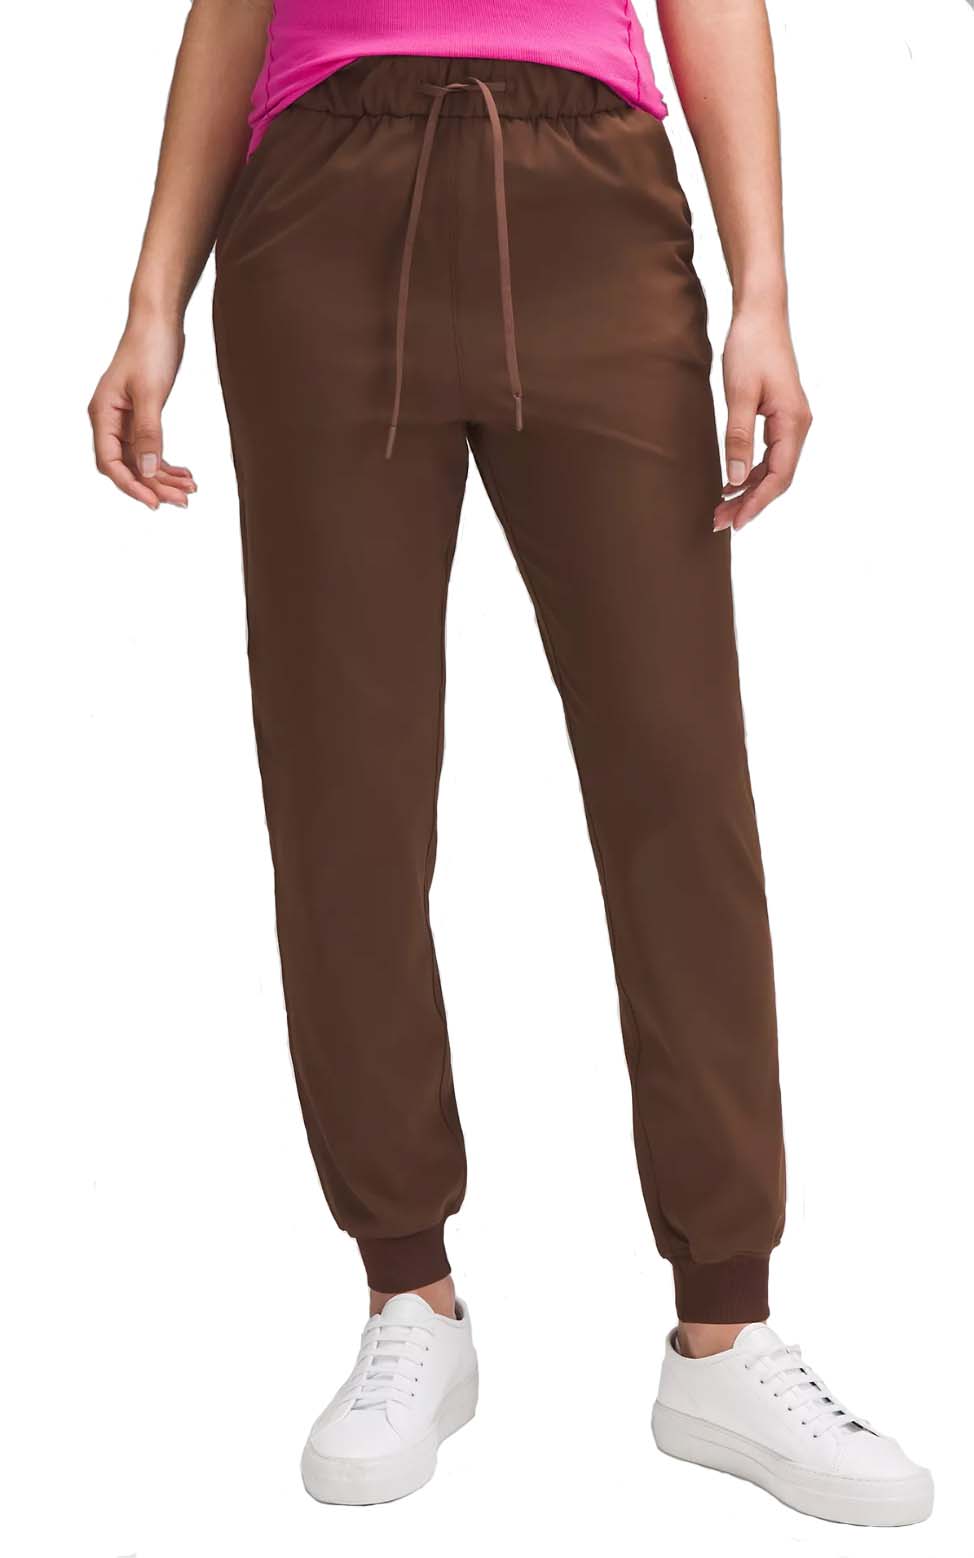 15 Comfy Winter Travel Pants at Amazon Under $45